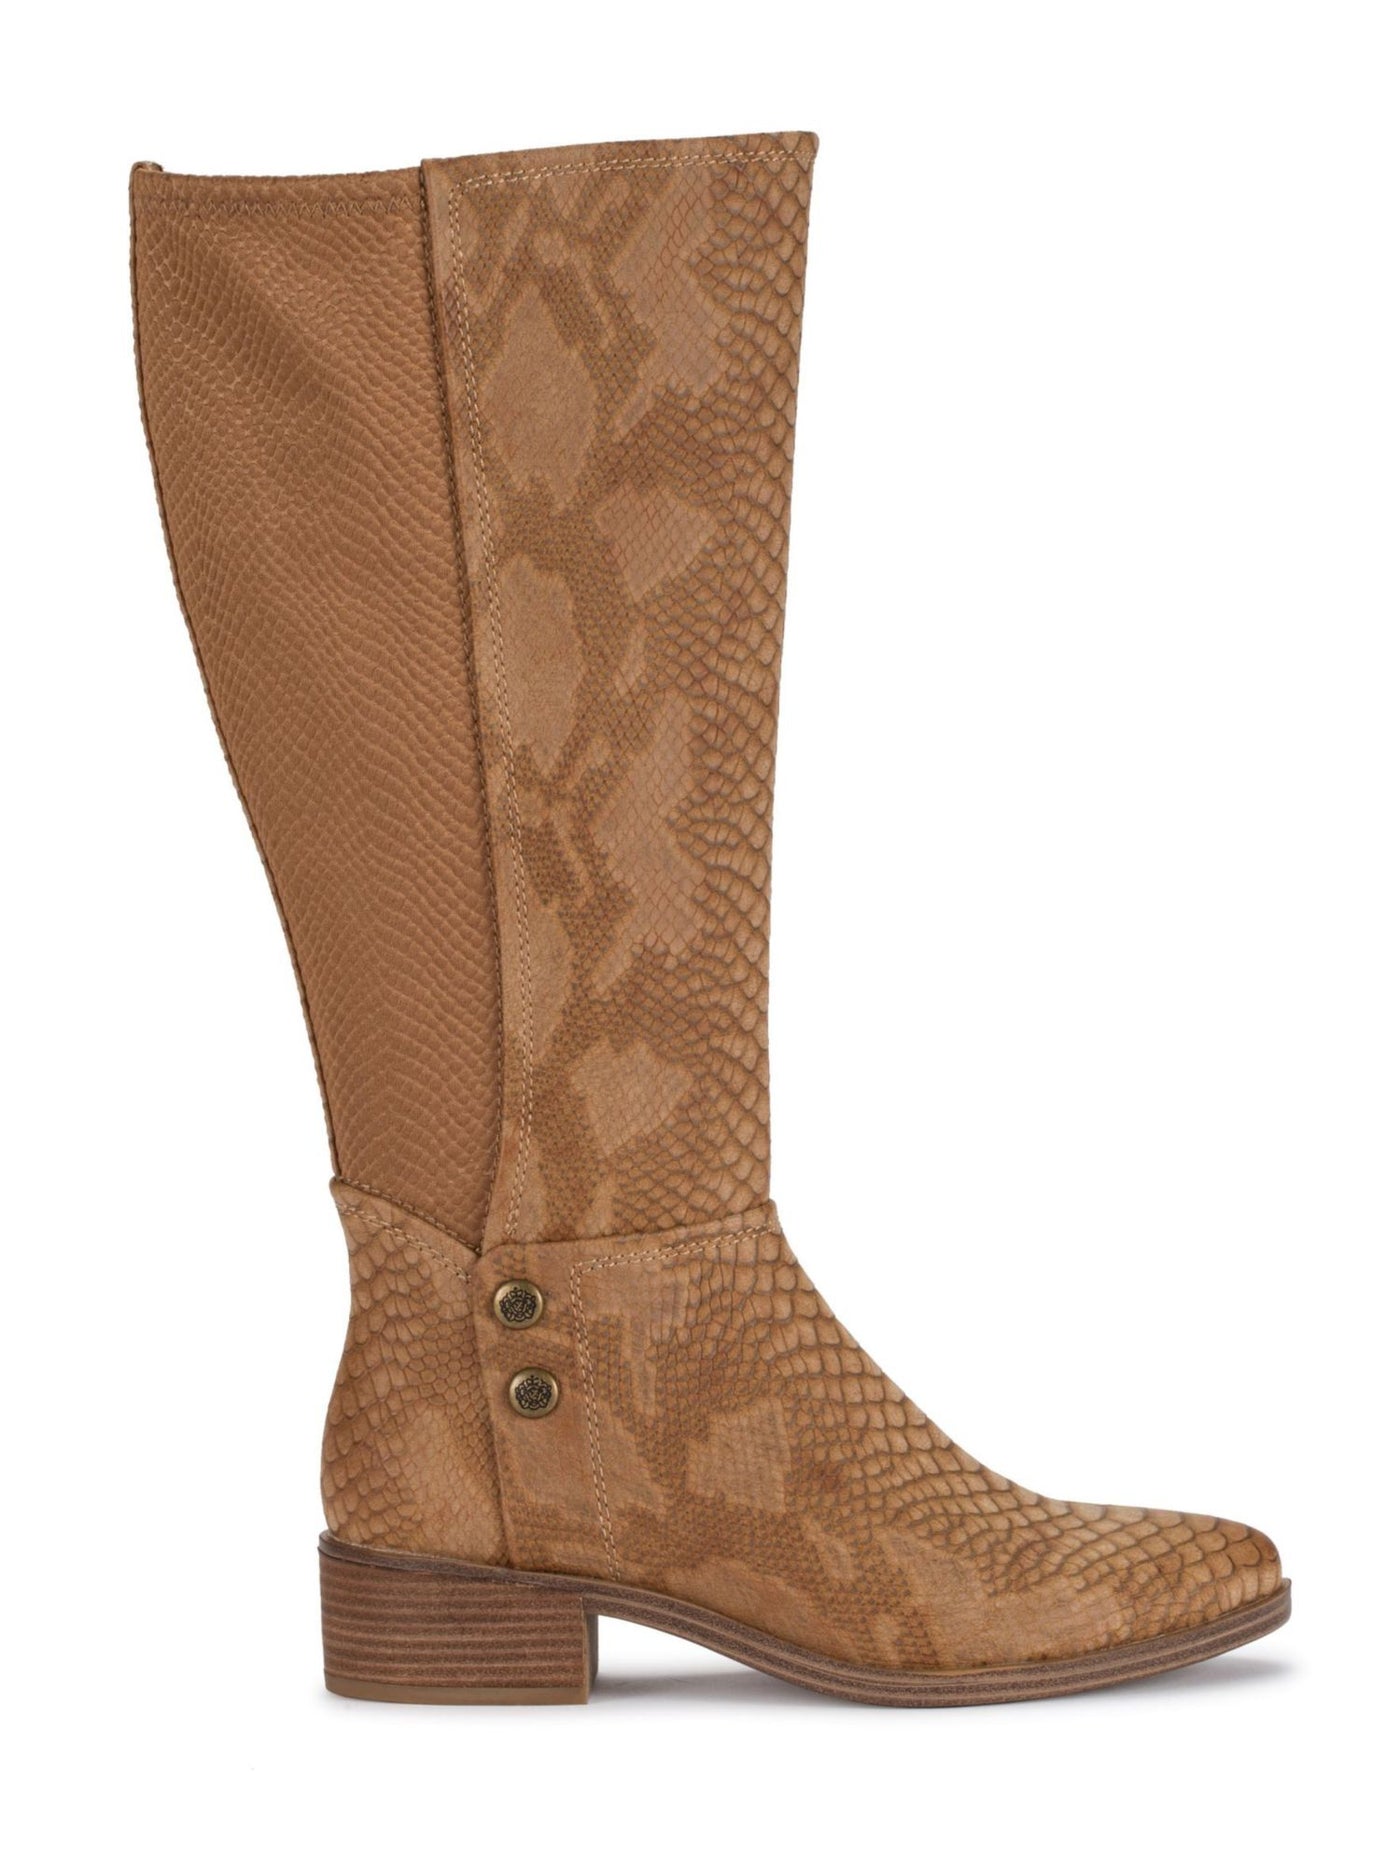 BARETRAPS Womens Beige Cushioned Stretch Almond Toe Stacked Heel Zip-Up Dress Boots 8